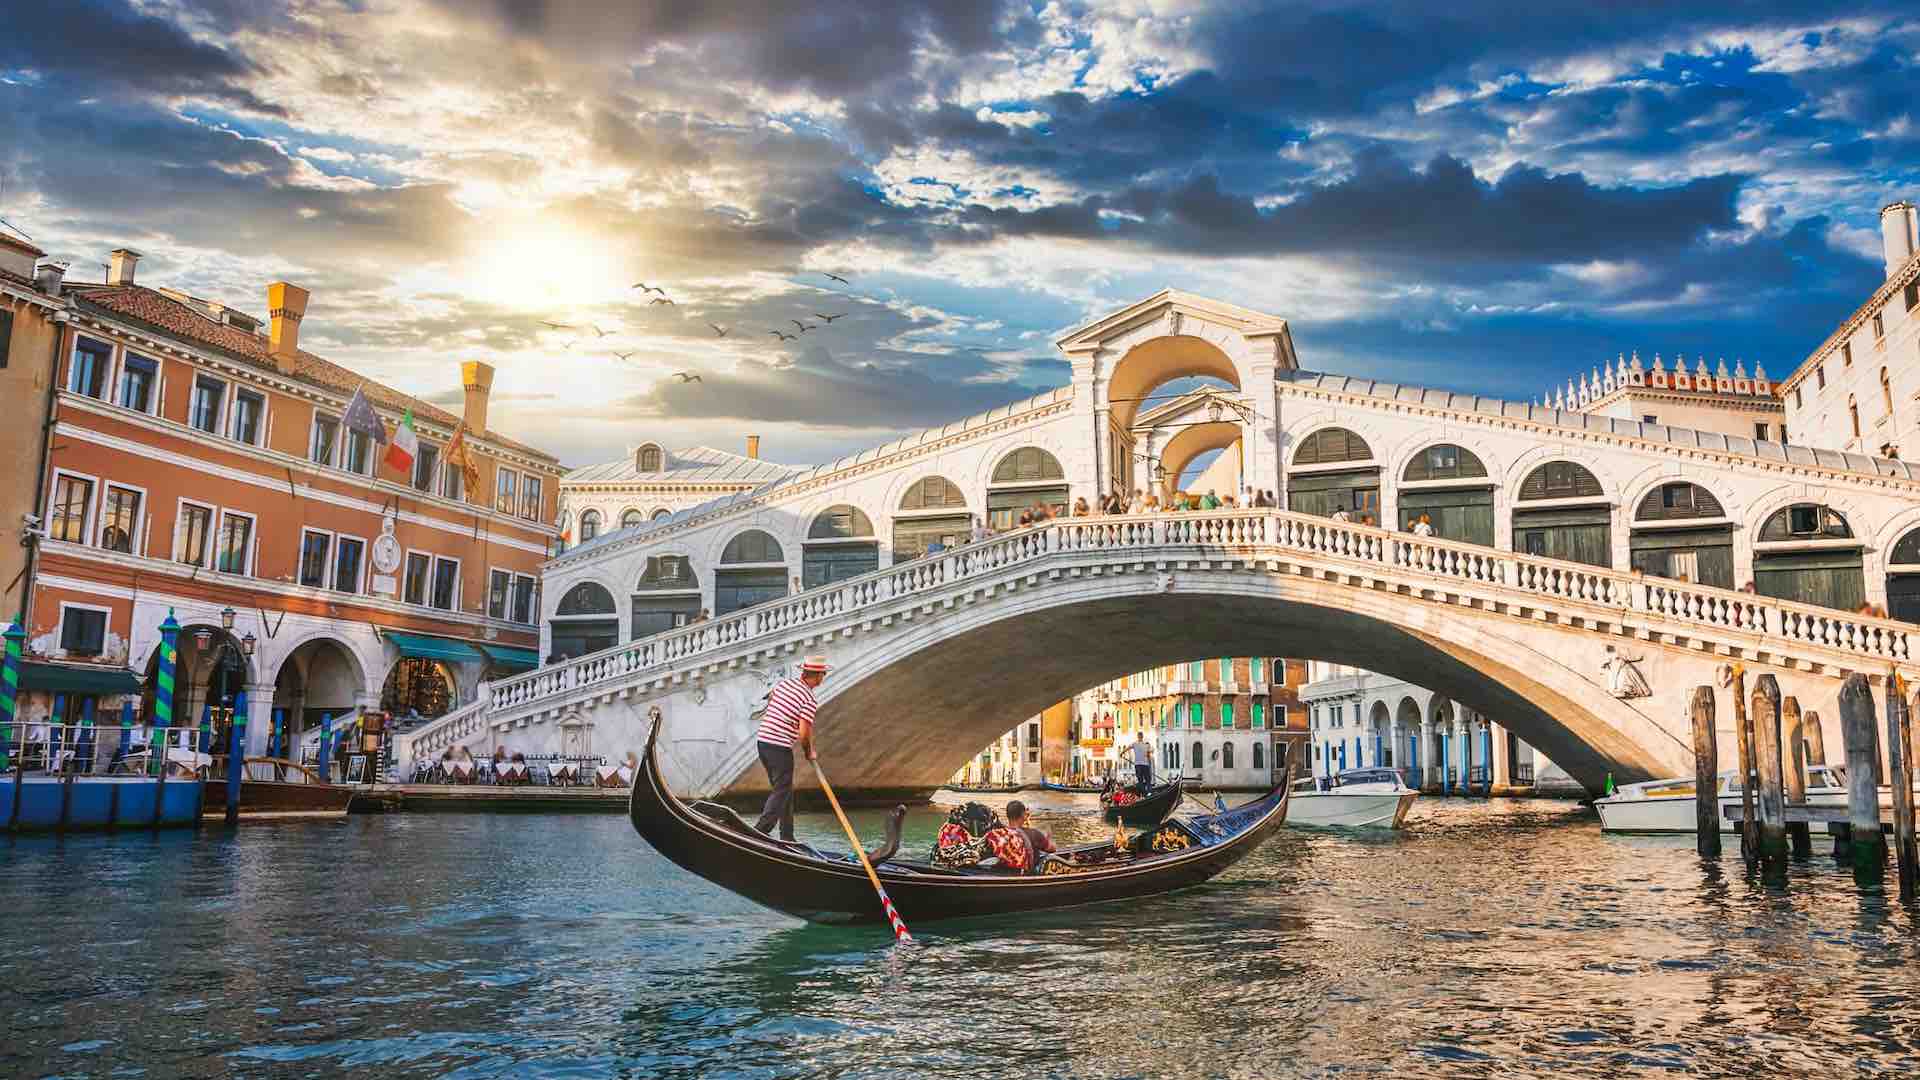 Venice to charge day visitors €5 starting next year